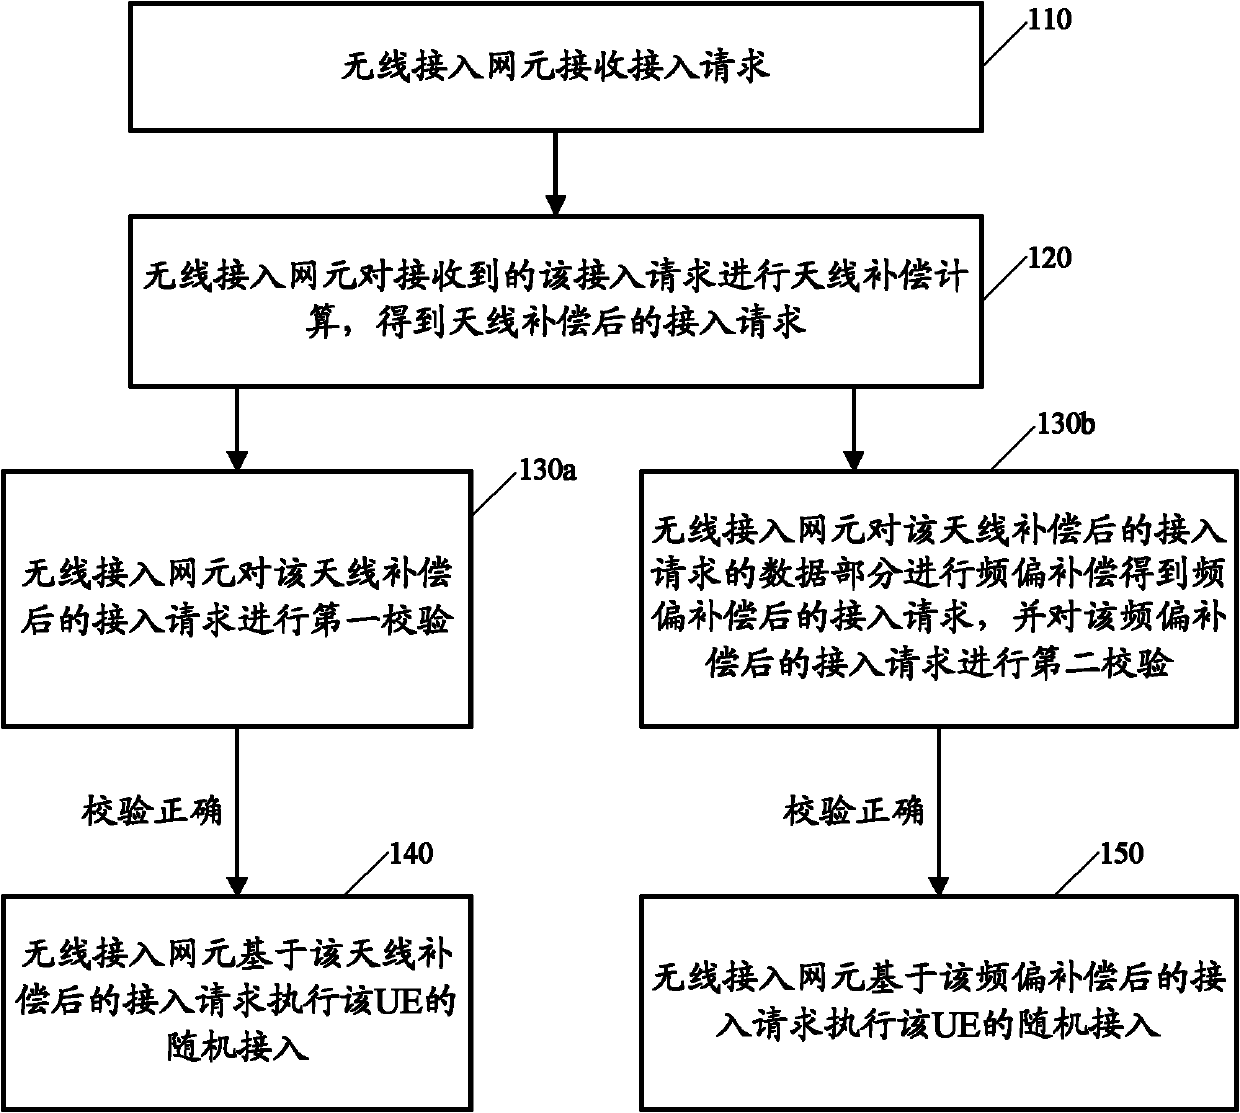 Random access method, wireless access network element and mobile communication system